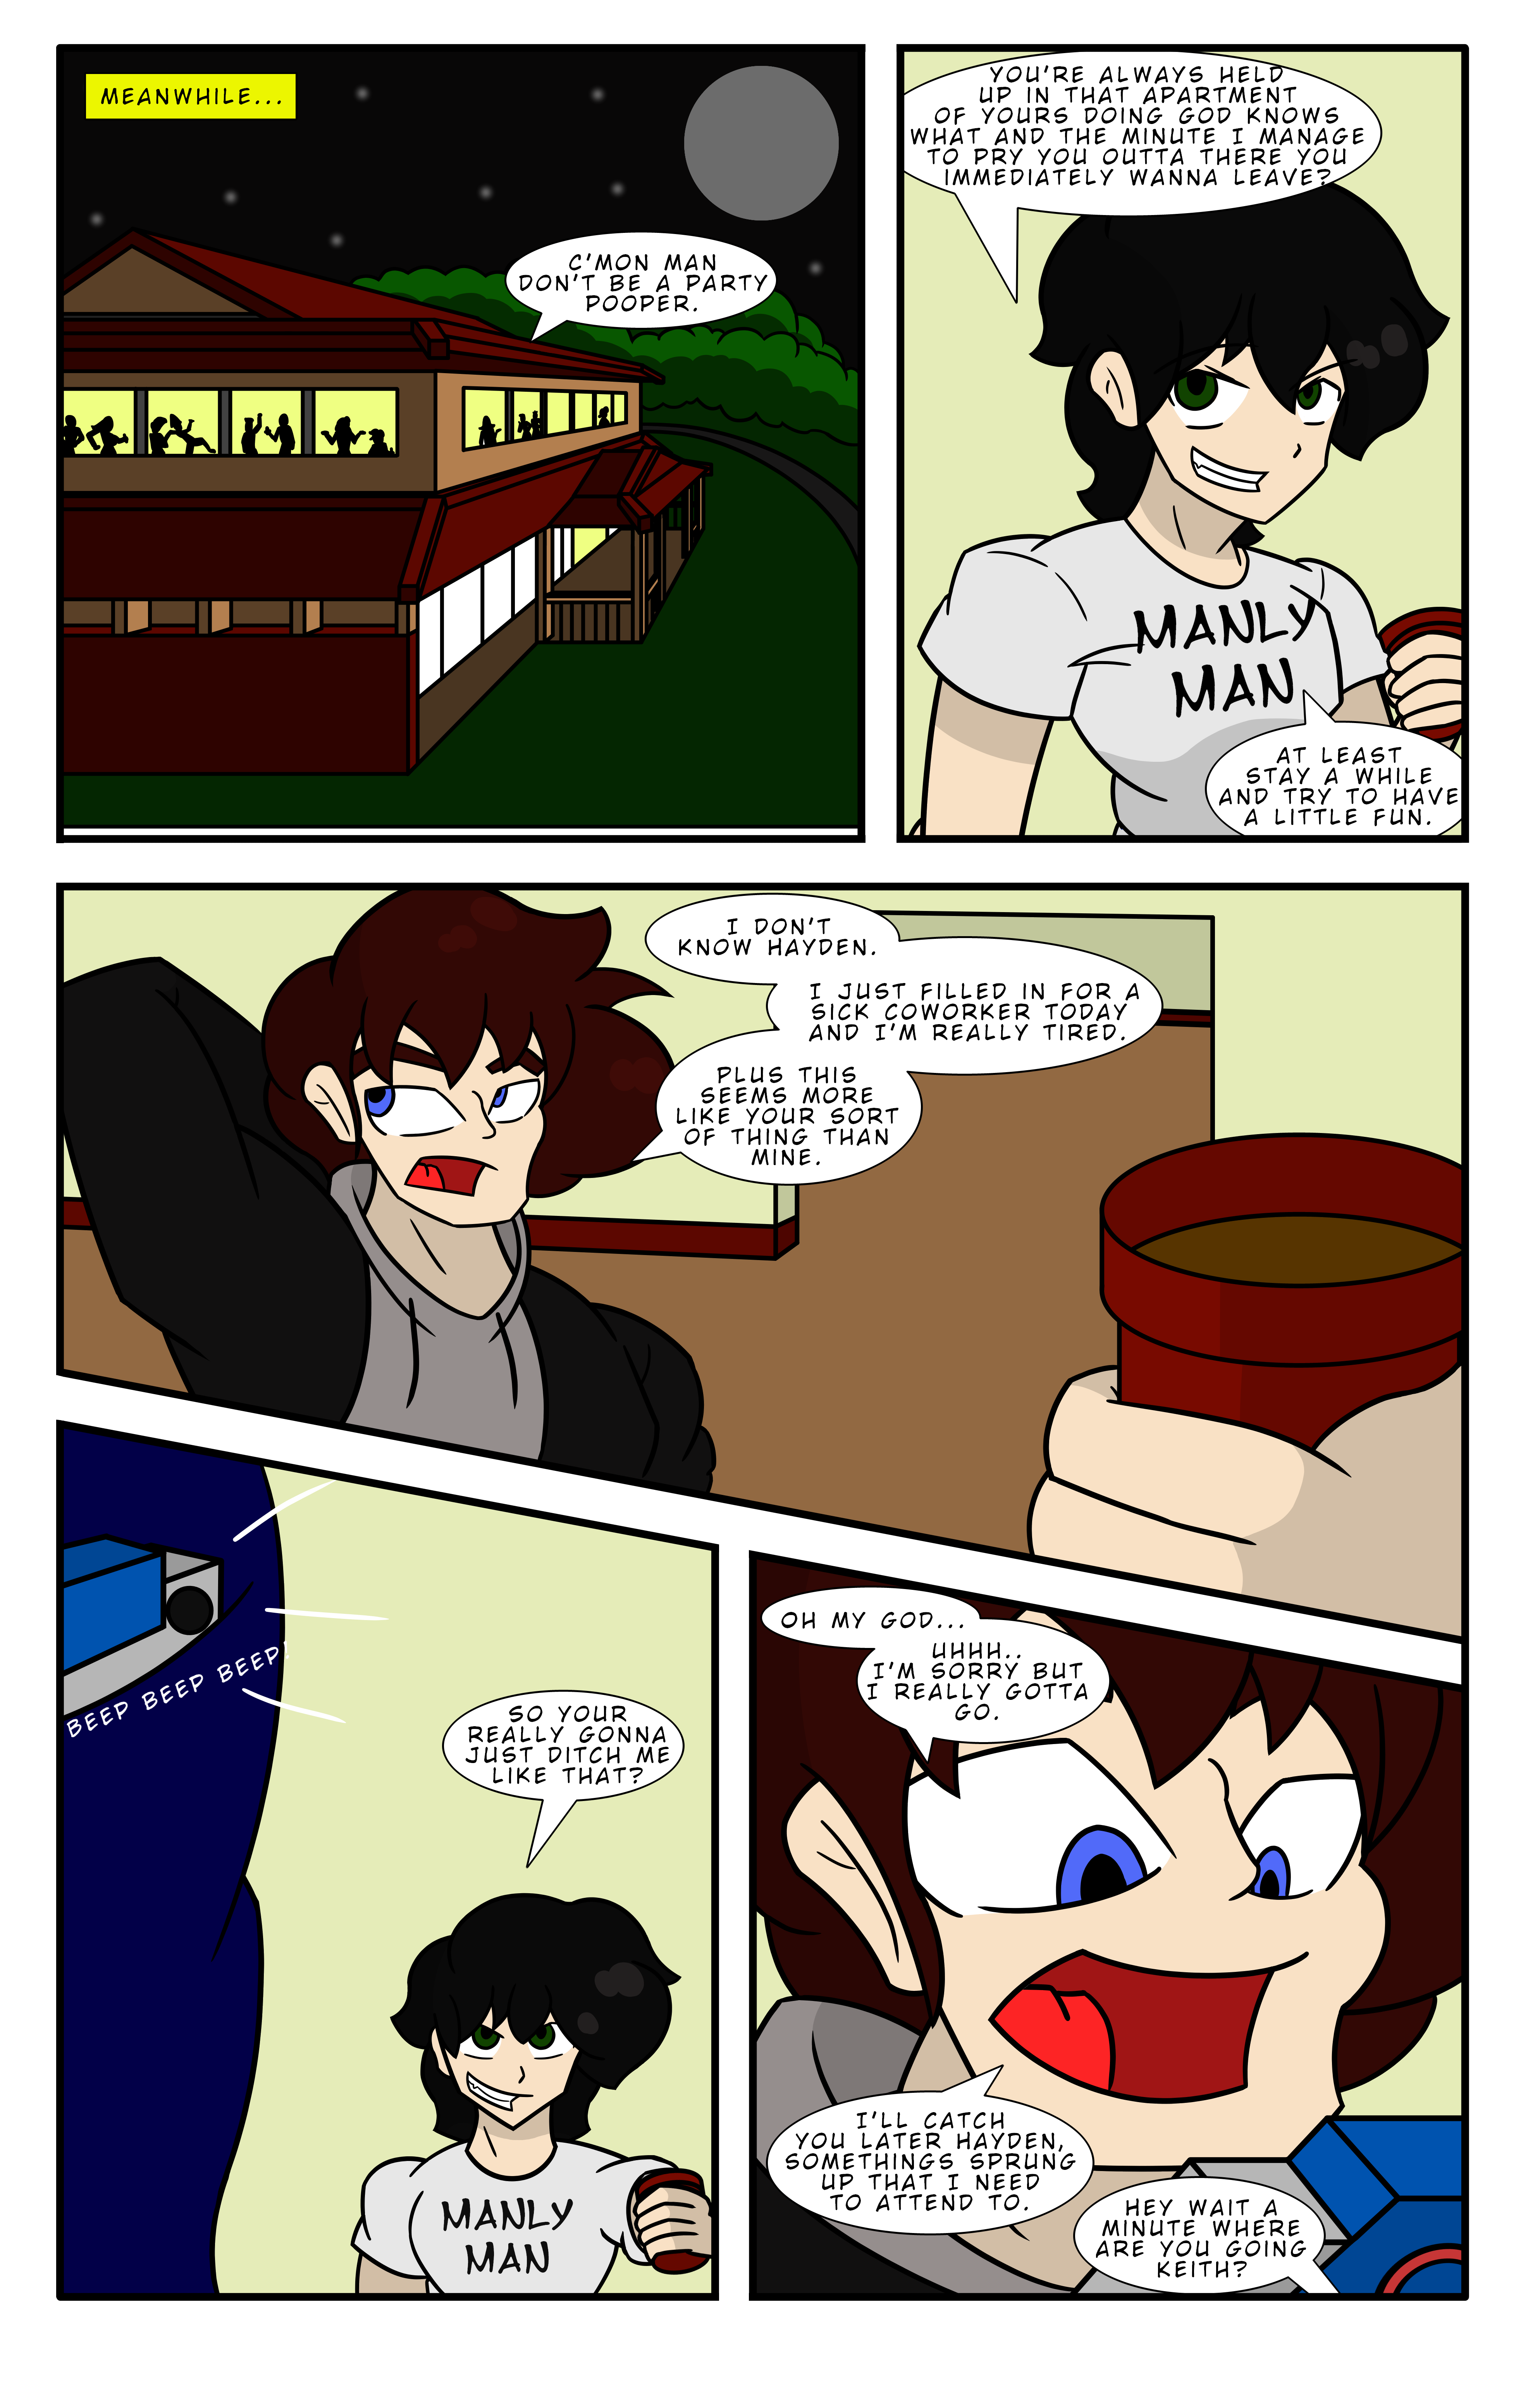 Metamorphosized Chapter One, Page Three